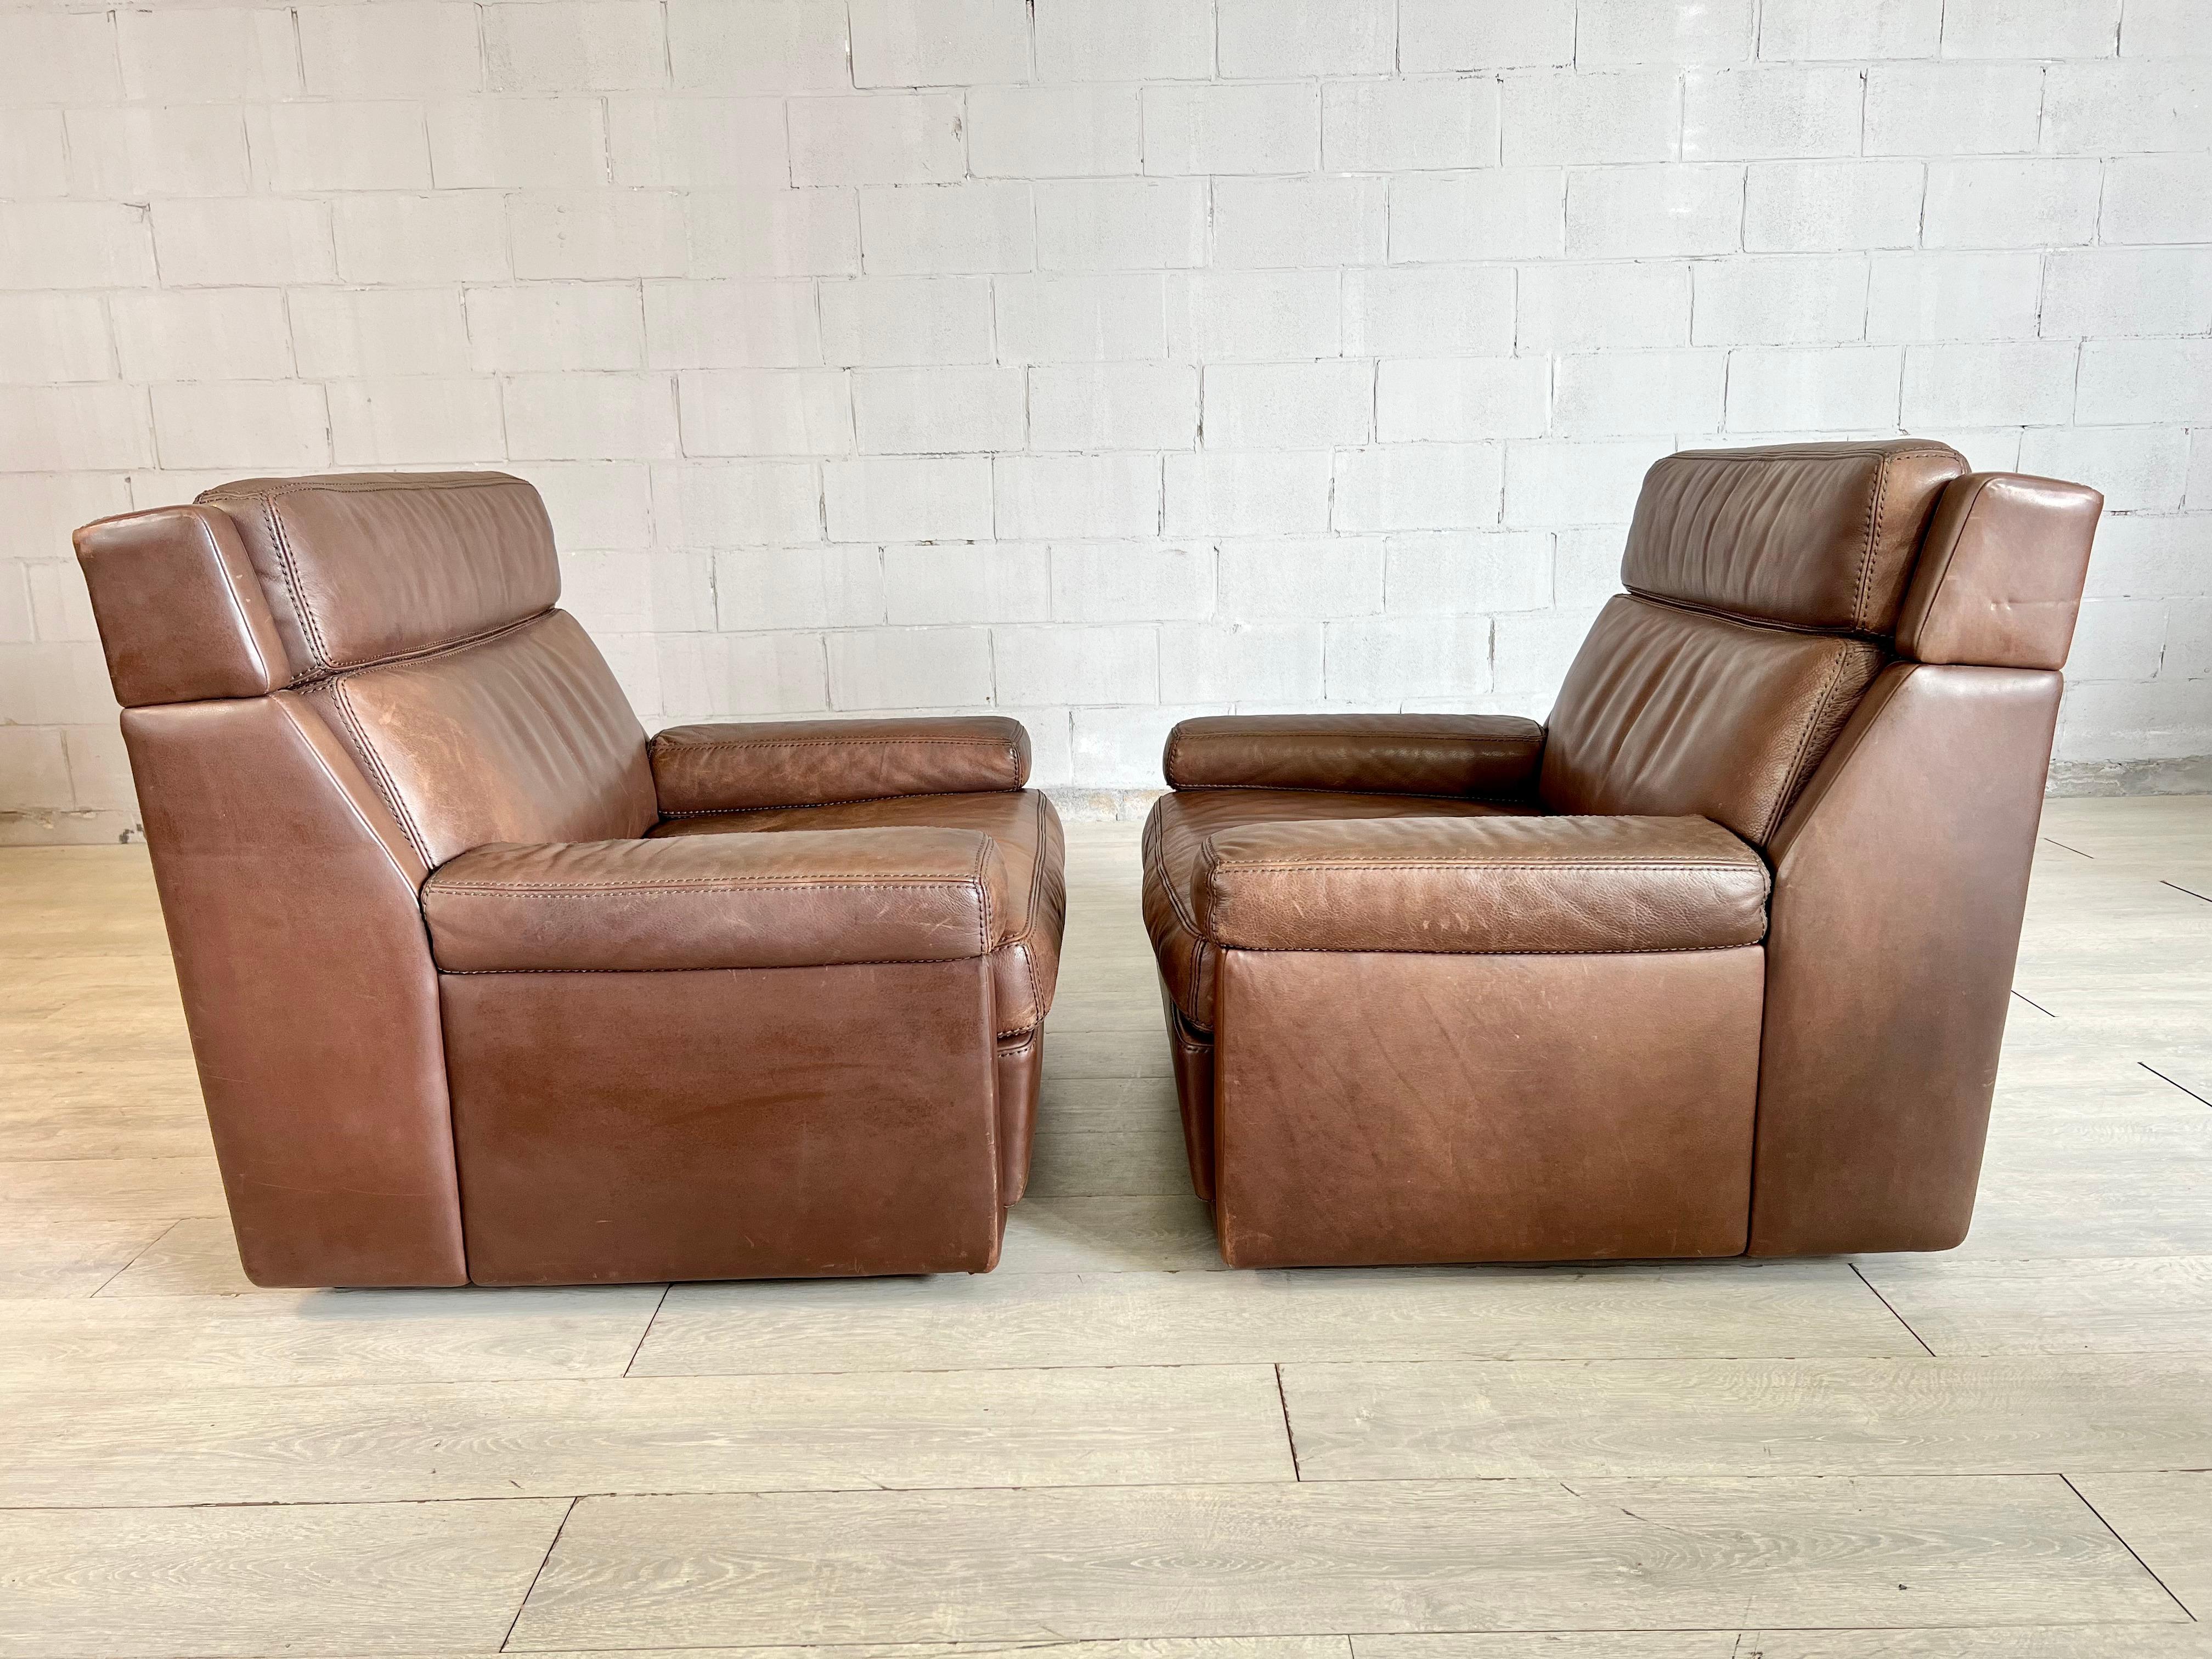 Original Vintage Modern Leather Armchairs by Durlet, Belgium, 1970s - a Pair For Sale 3